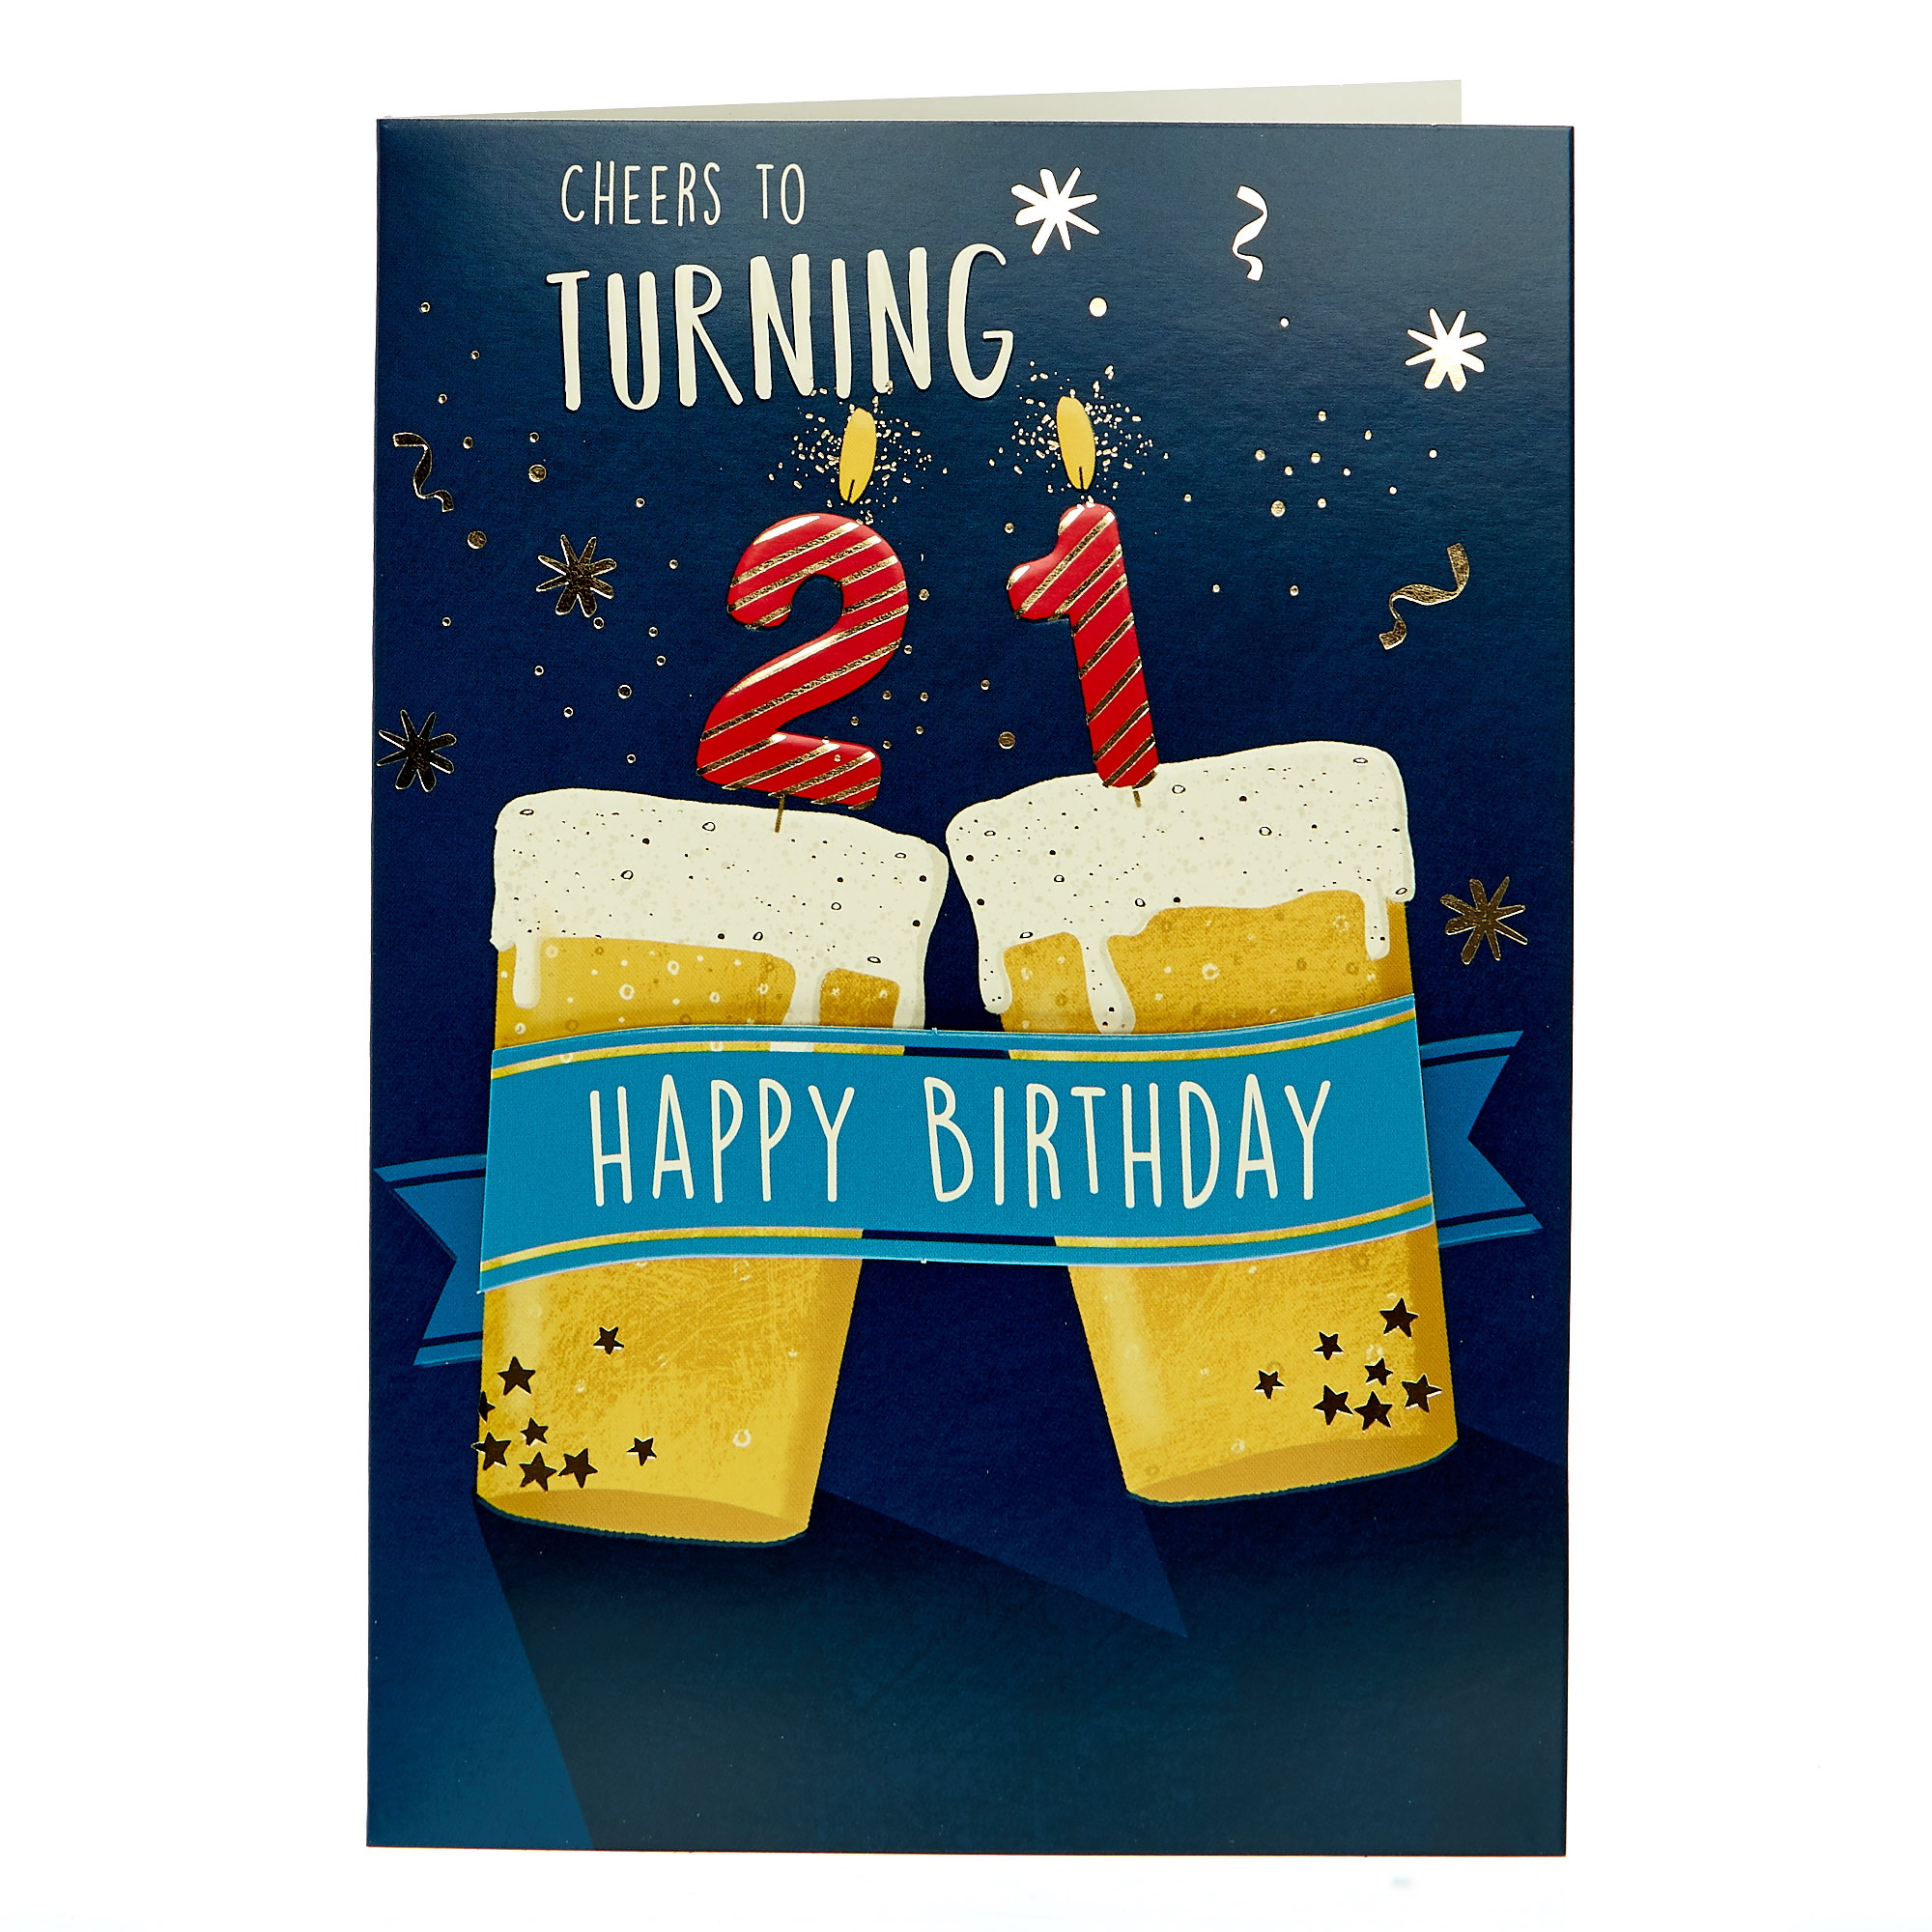 21st Birthday Card - Cheers to Turning 21